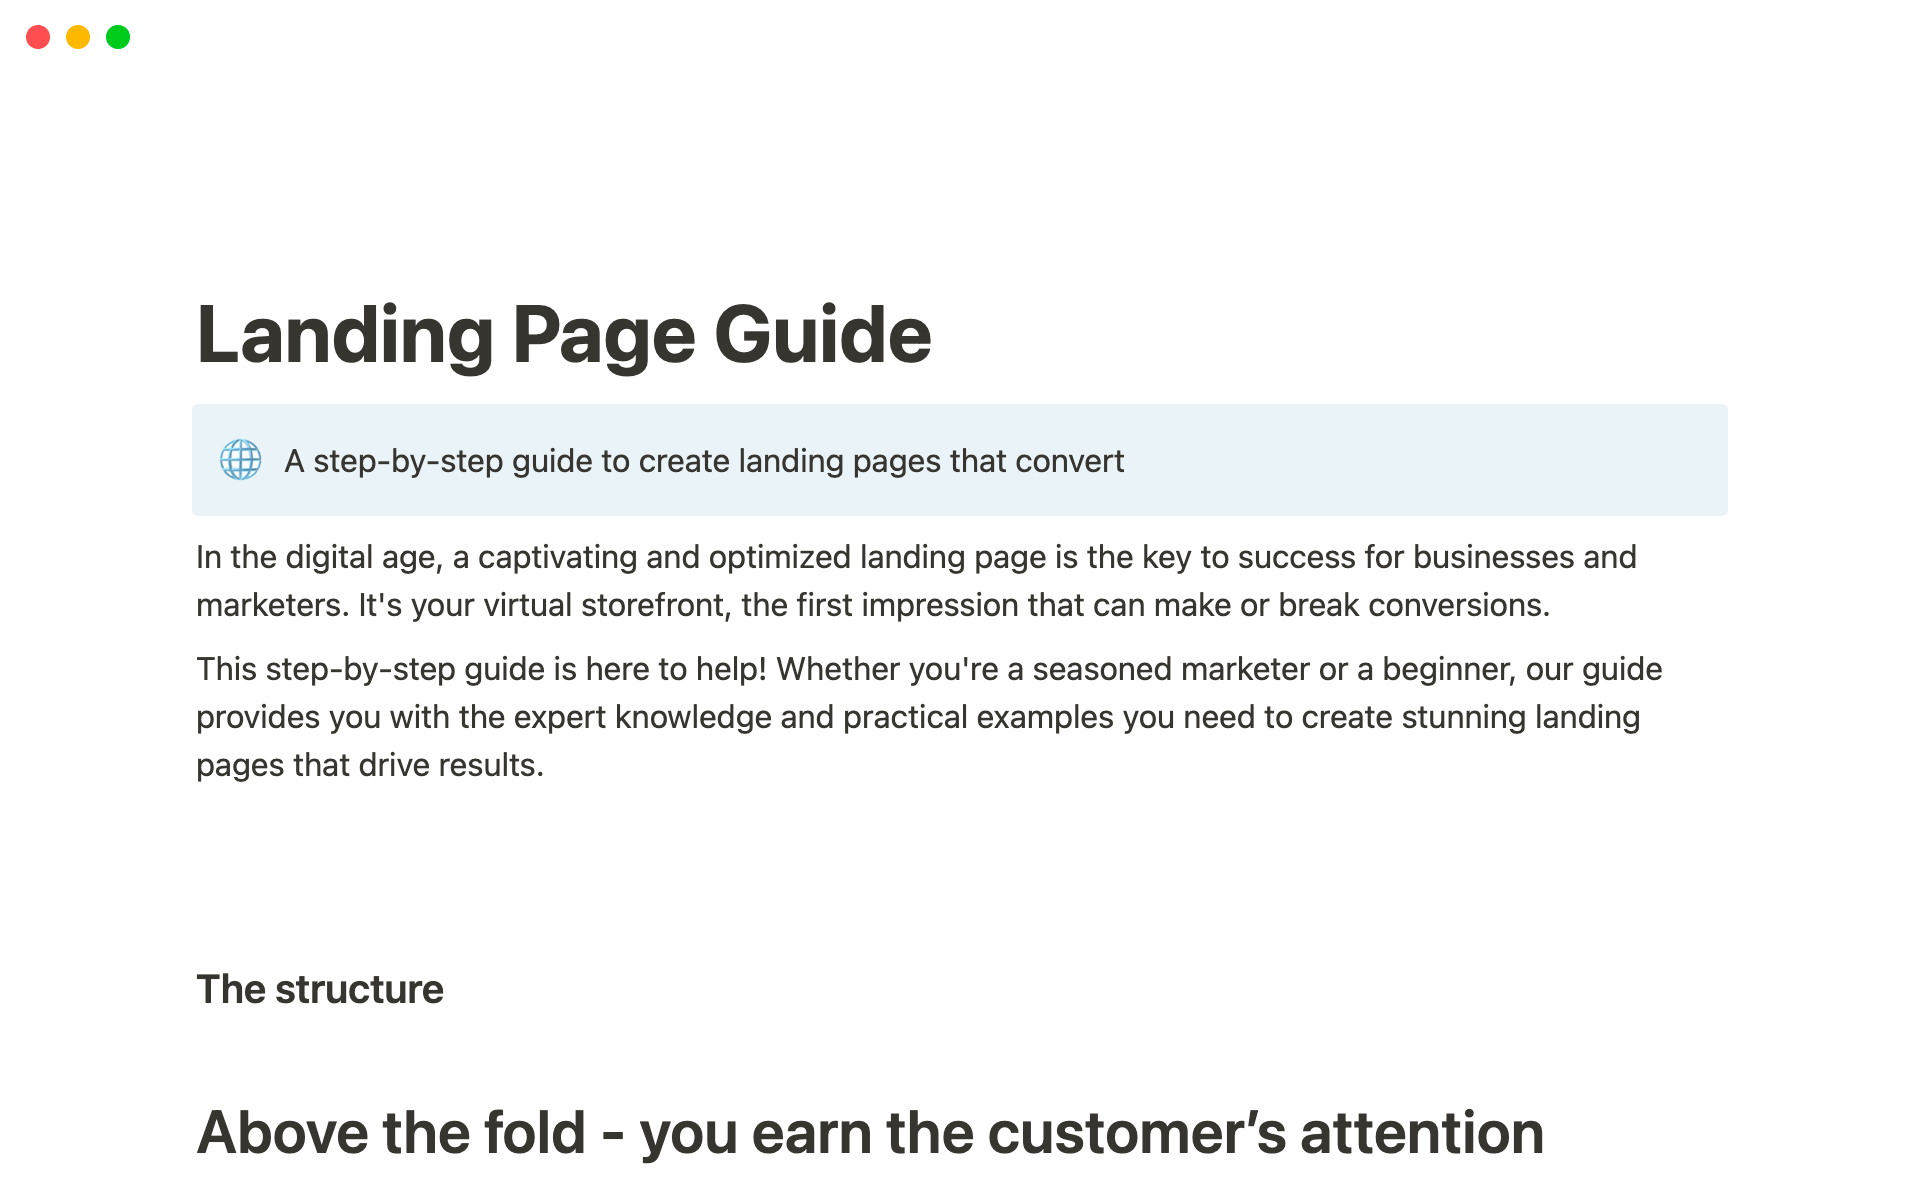 A step-by-step guide to create landing pages that convert